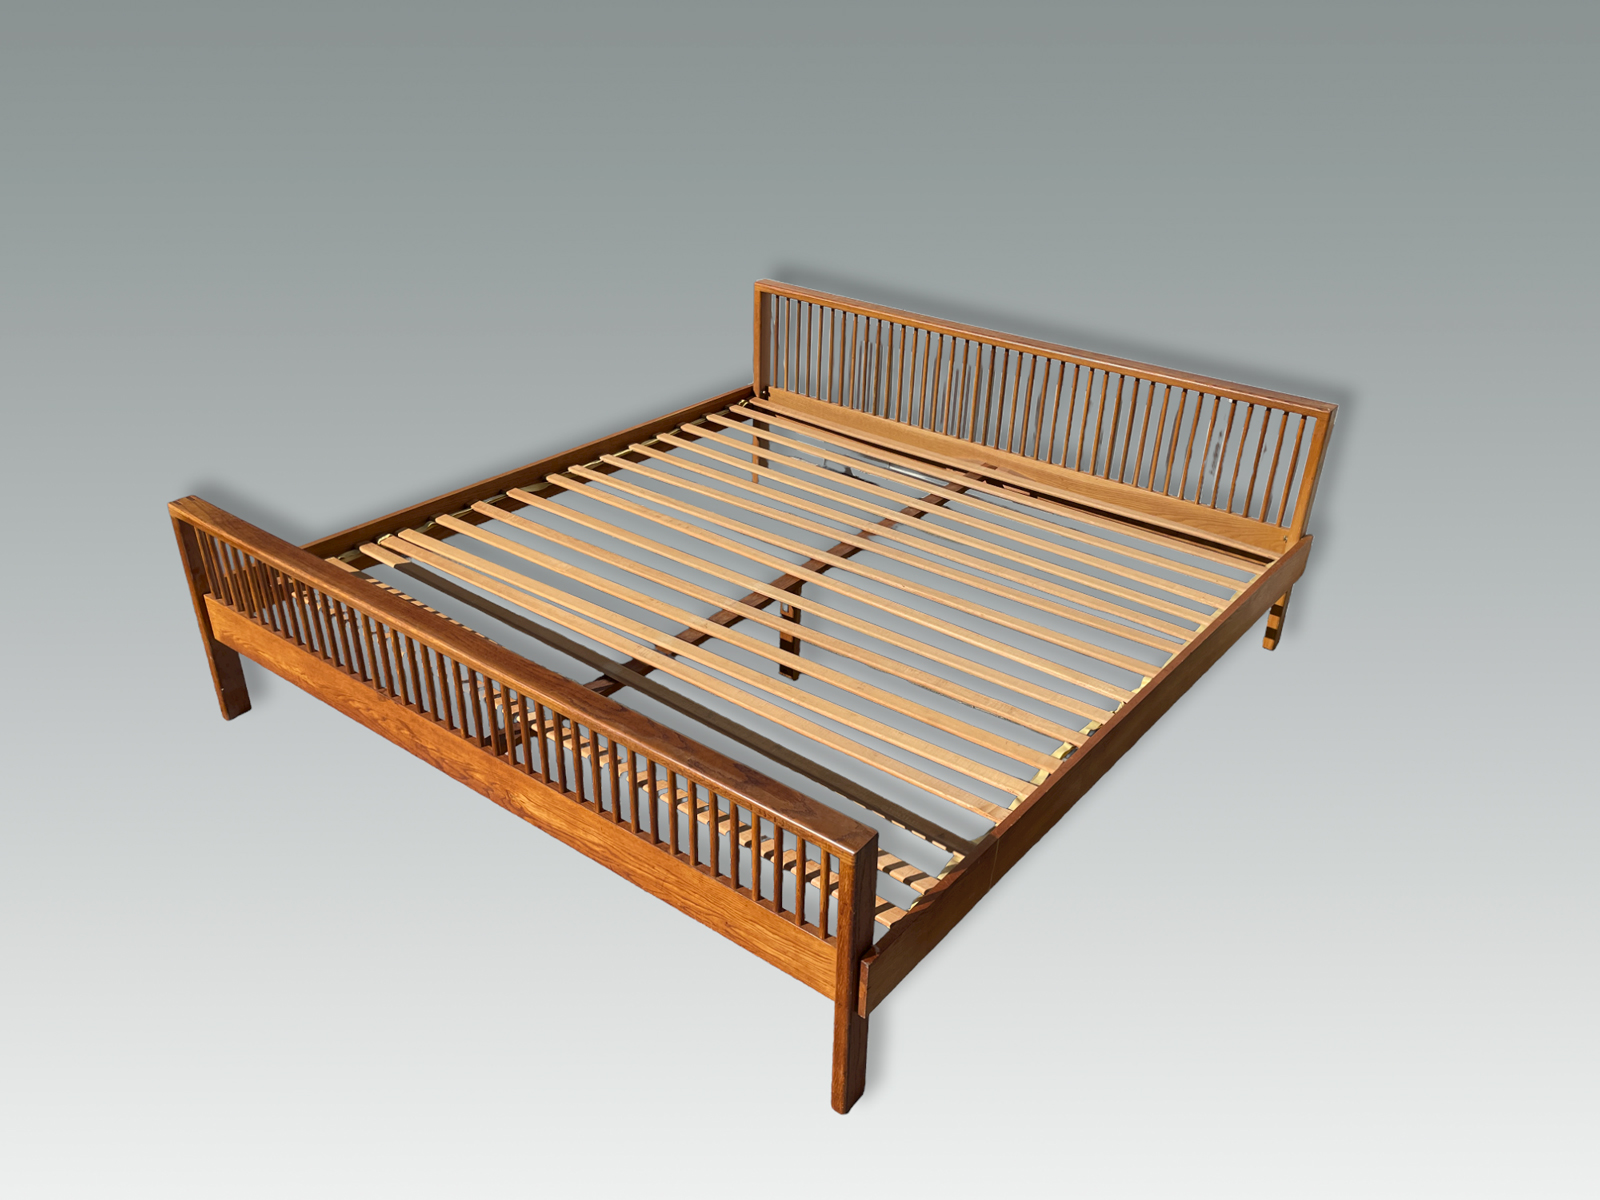 KING SIZE CHARLES WEBB BED: Mid-century